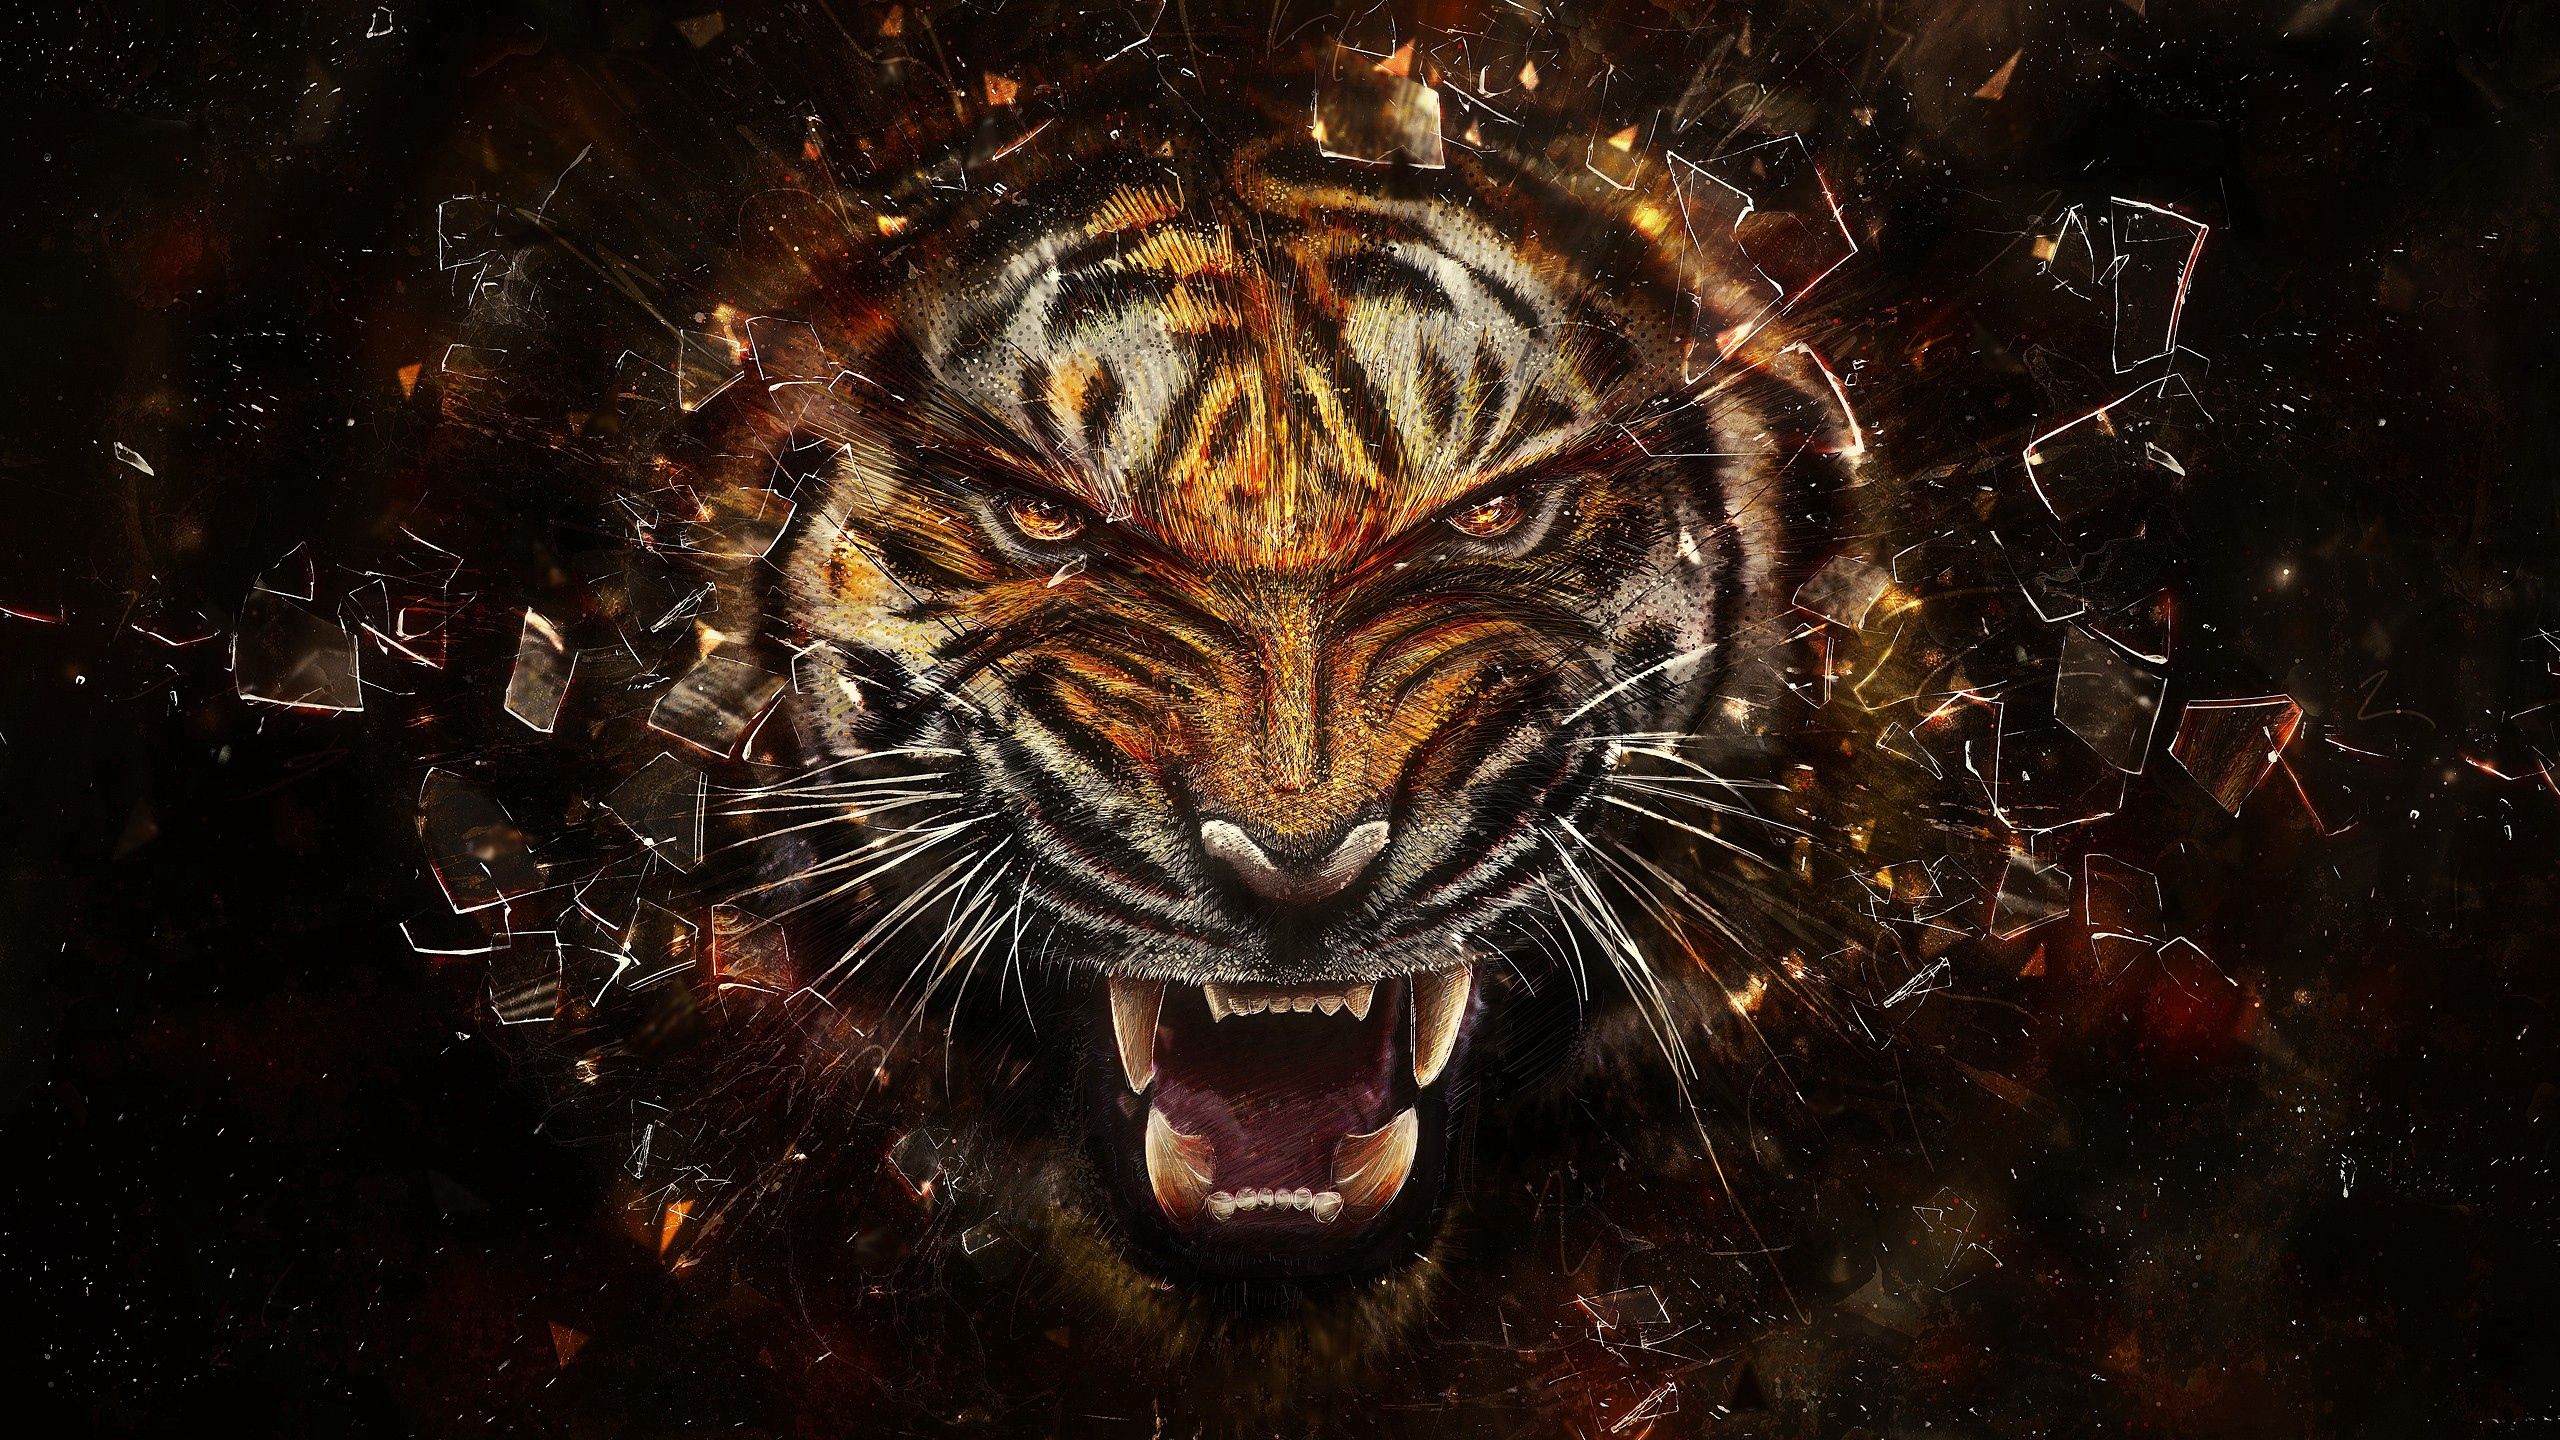 aggression, smithereens, tiger, abstract, grin, glass, shards